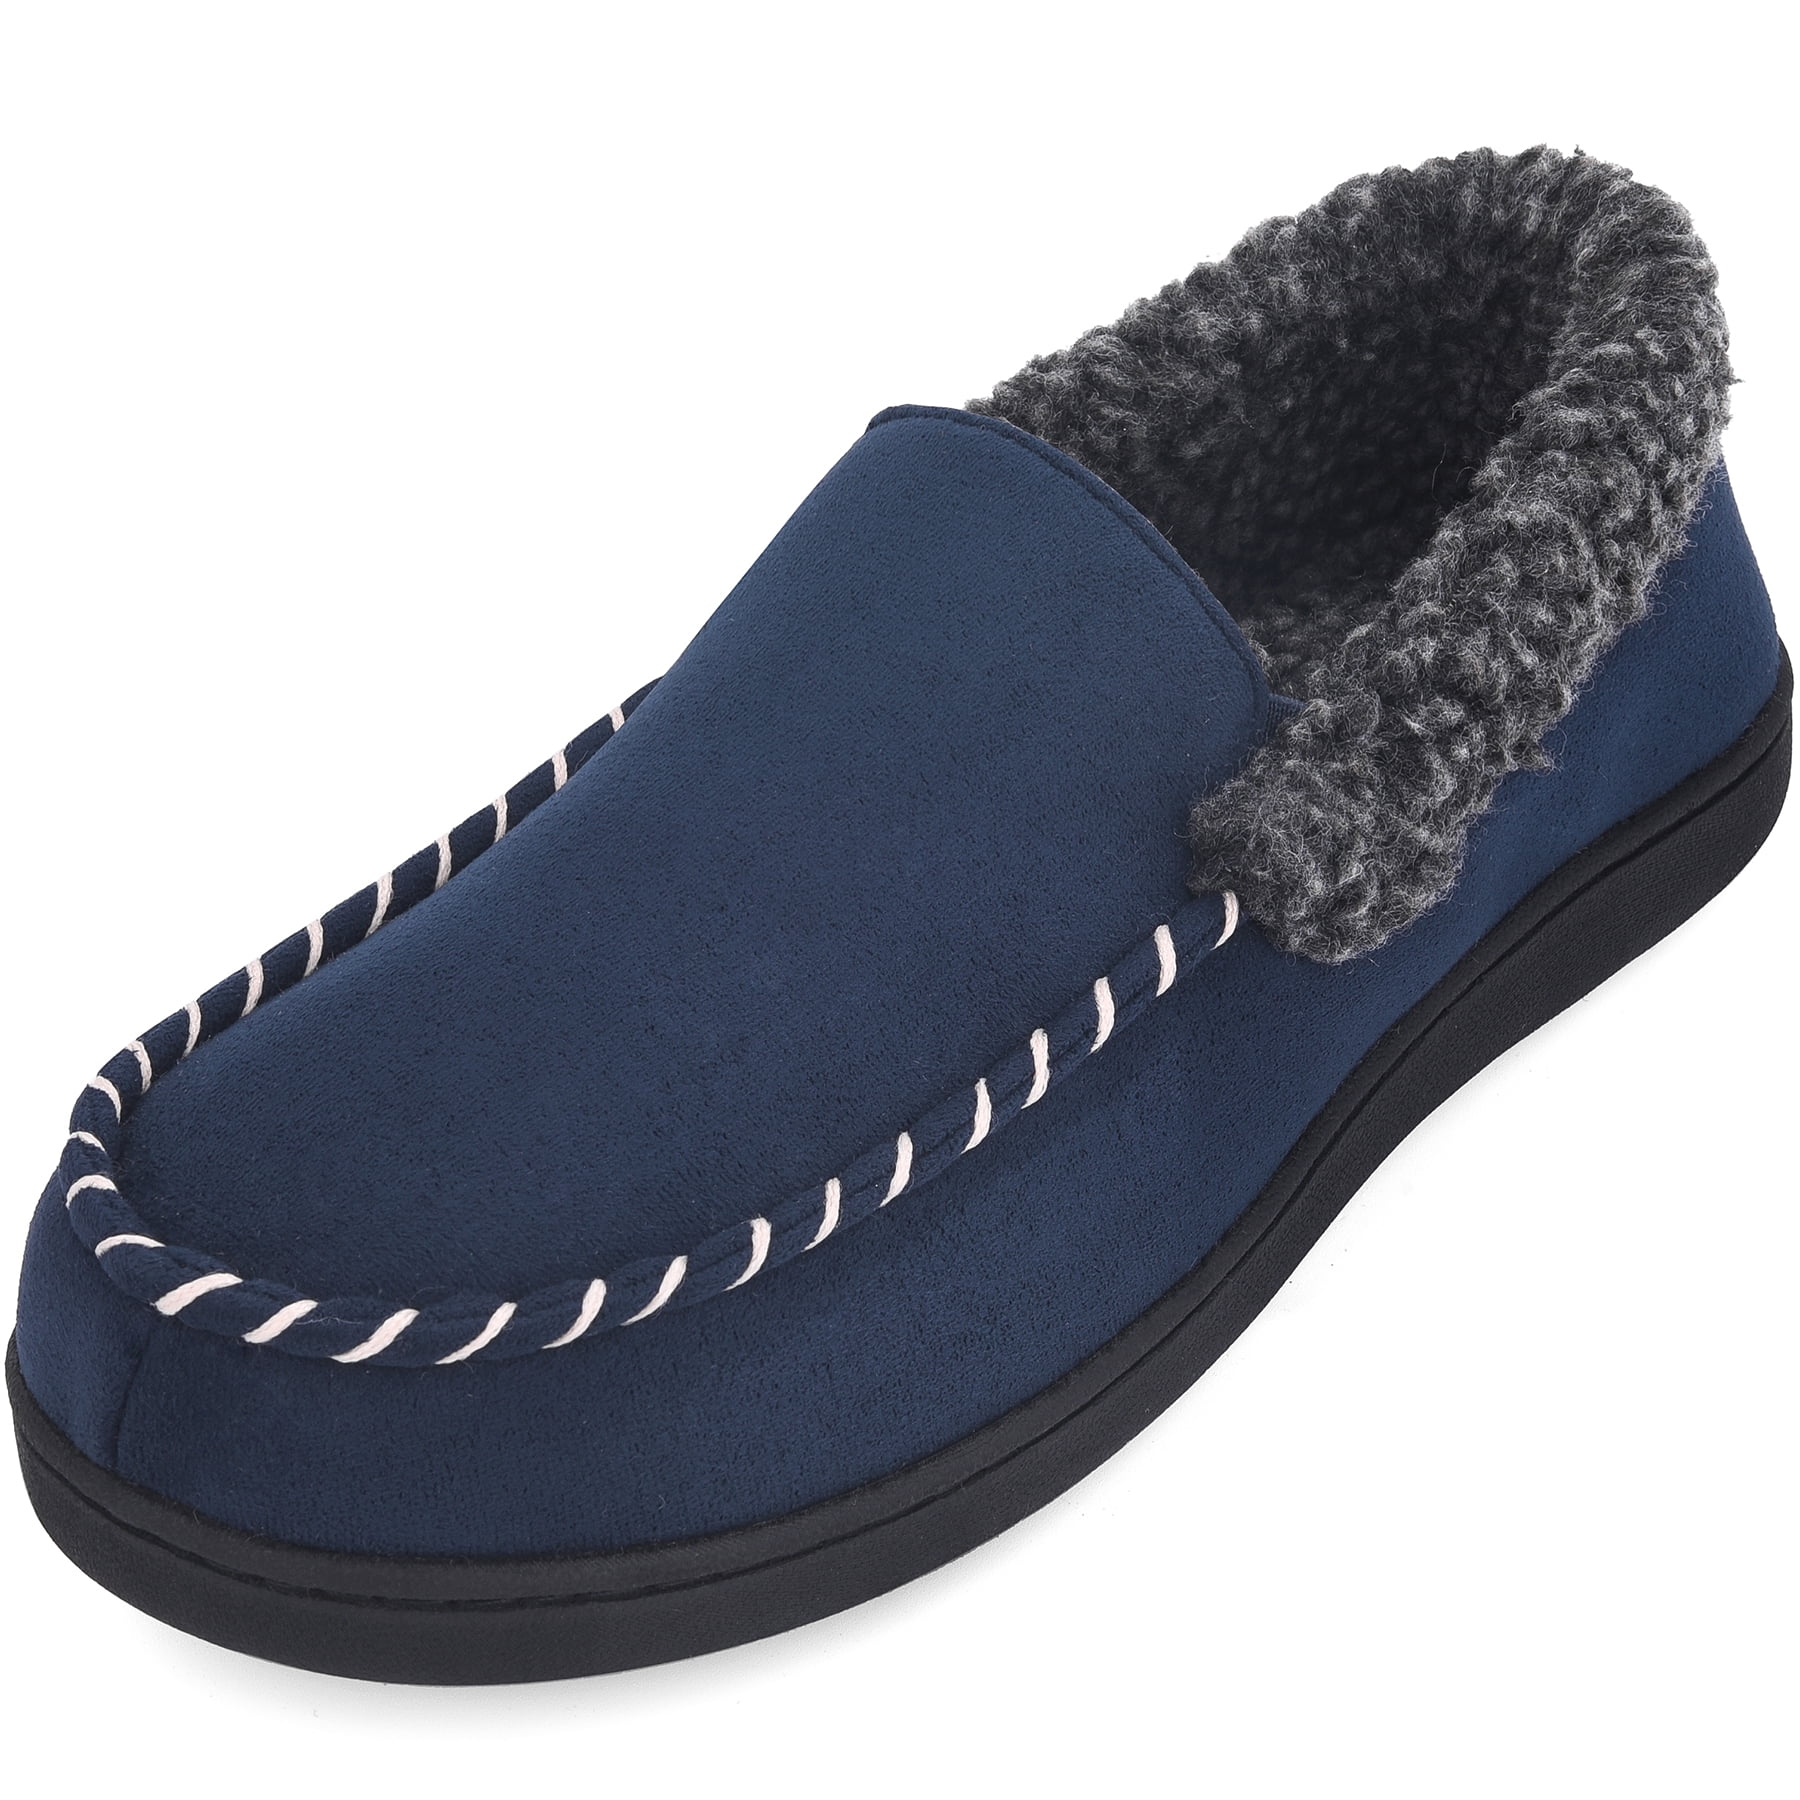 Moccasin Slippers Fuzzy House Shoes 